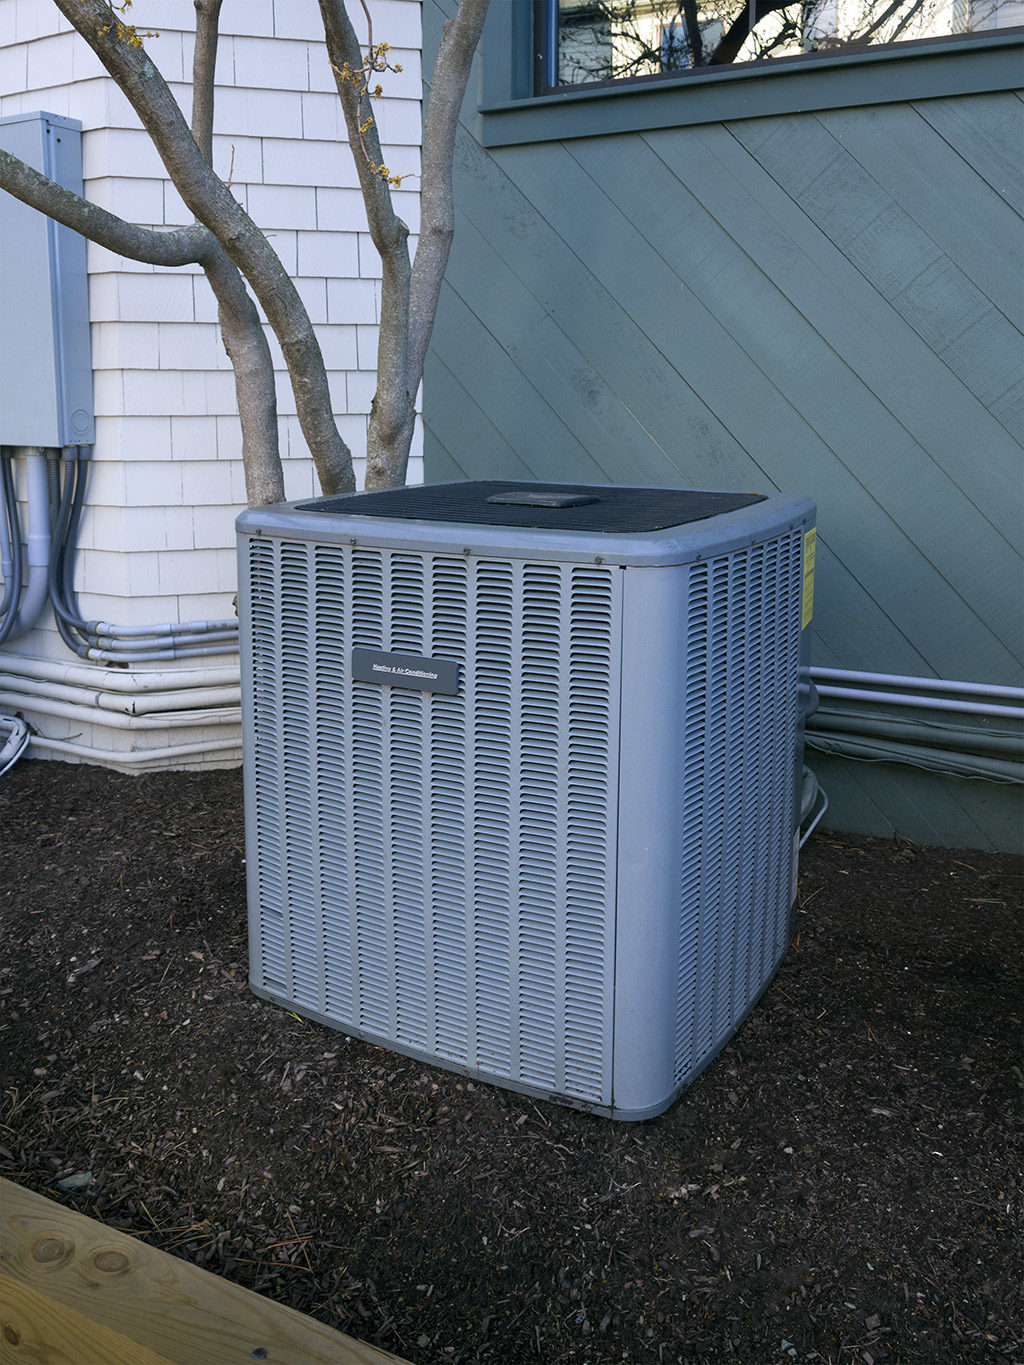 4 Myths Declared Baseless by Technicians of Air Conditioning Service in Richardson, TX